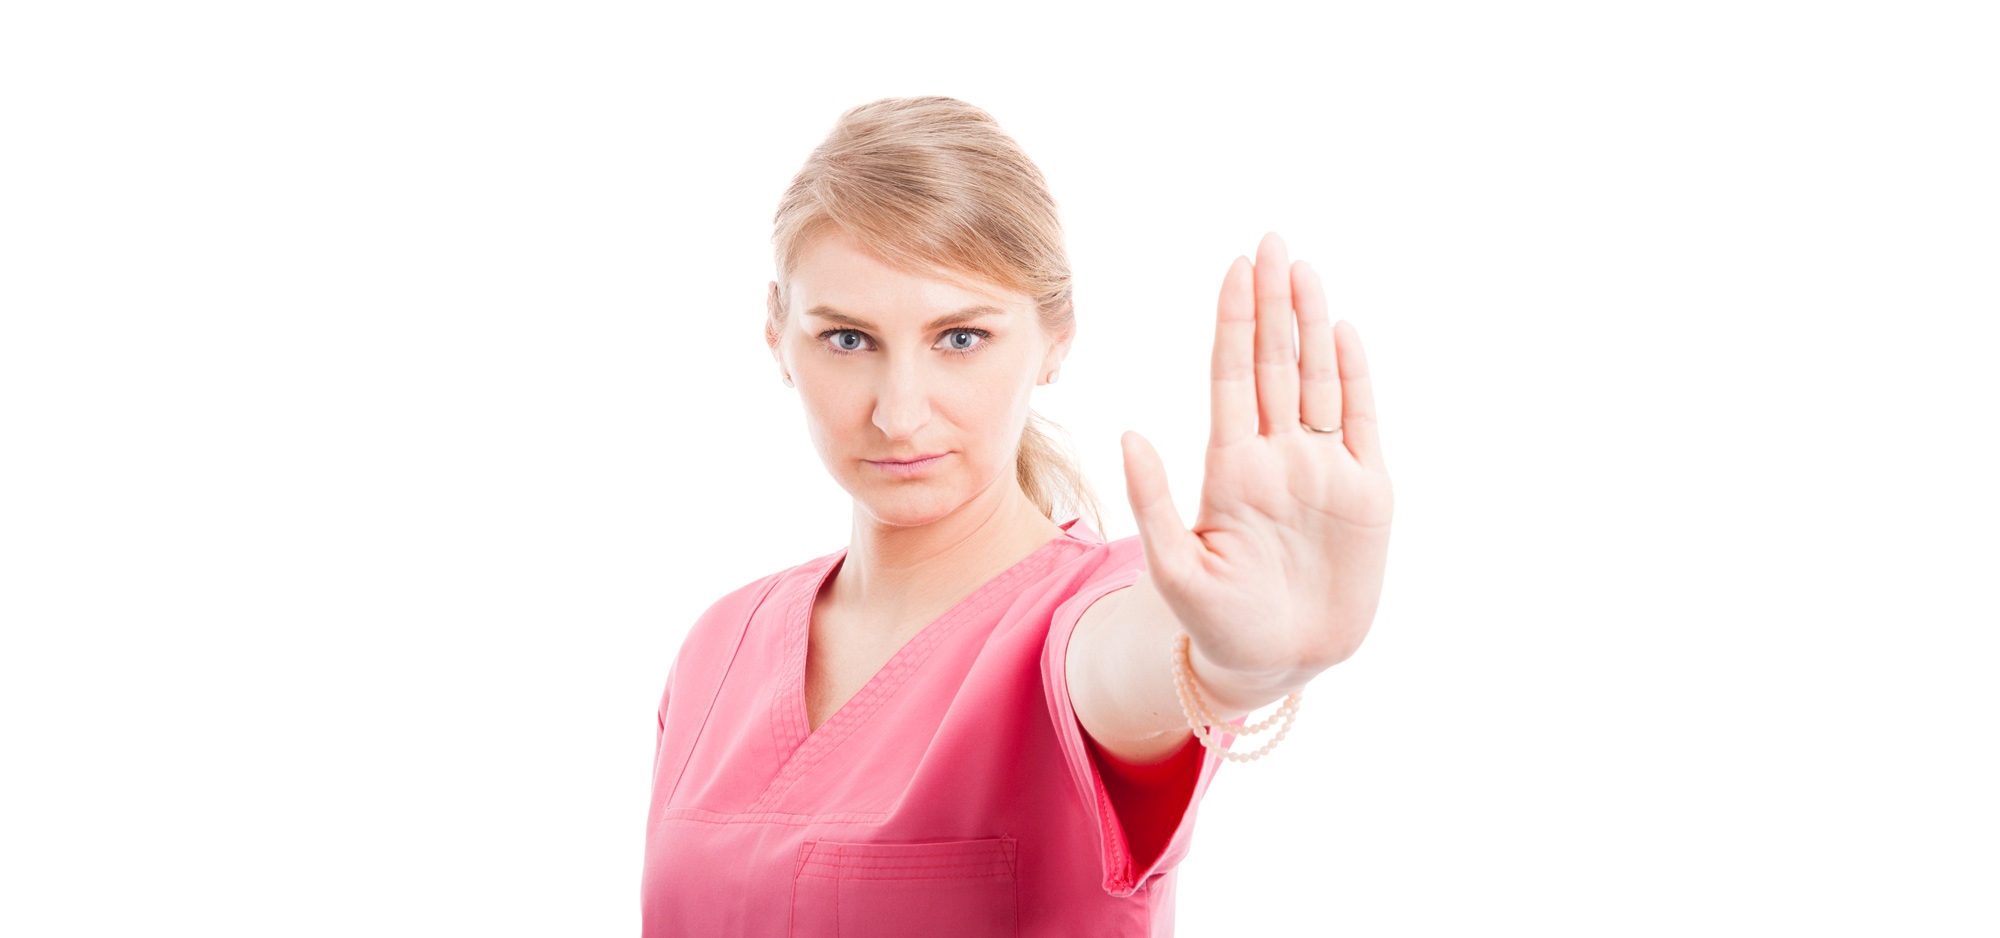 Nurse holding her hand up to stop workplace bullying.